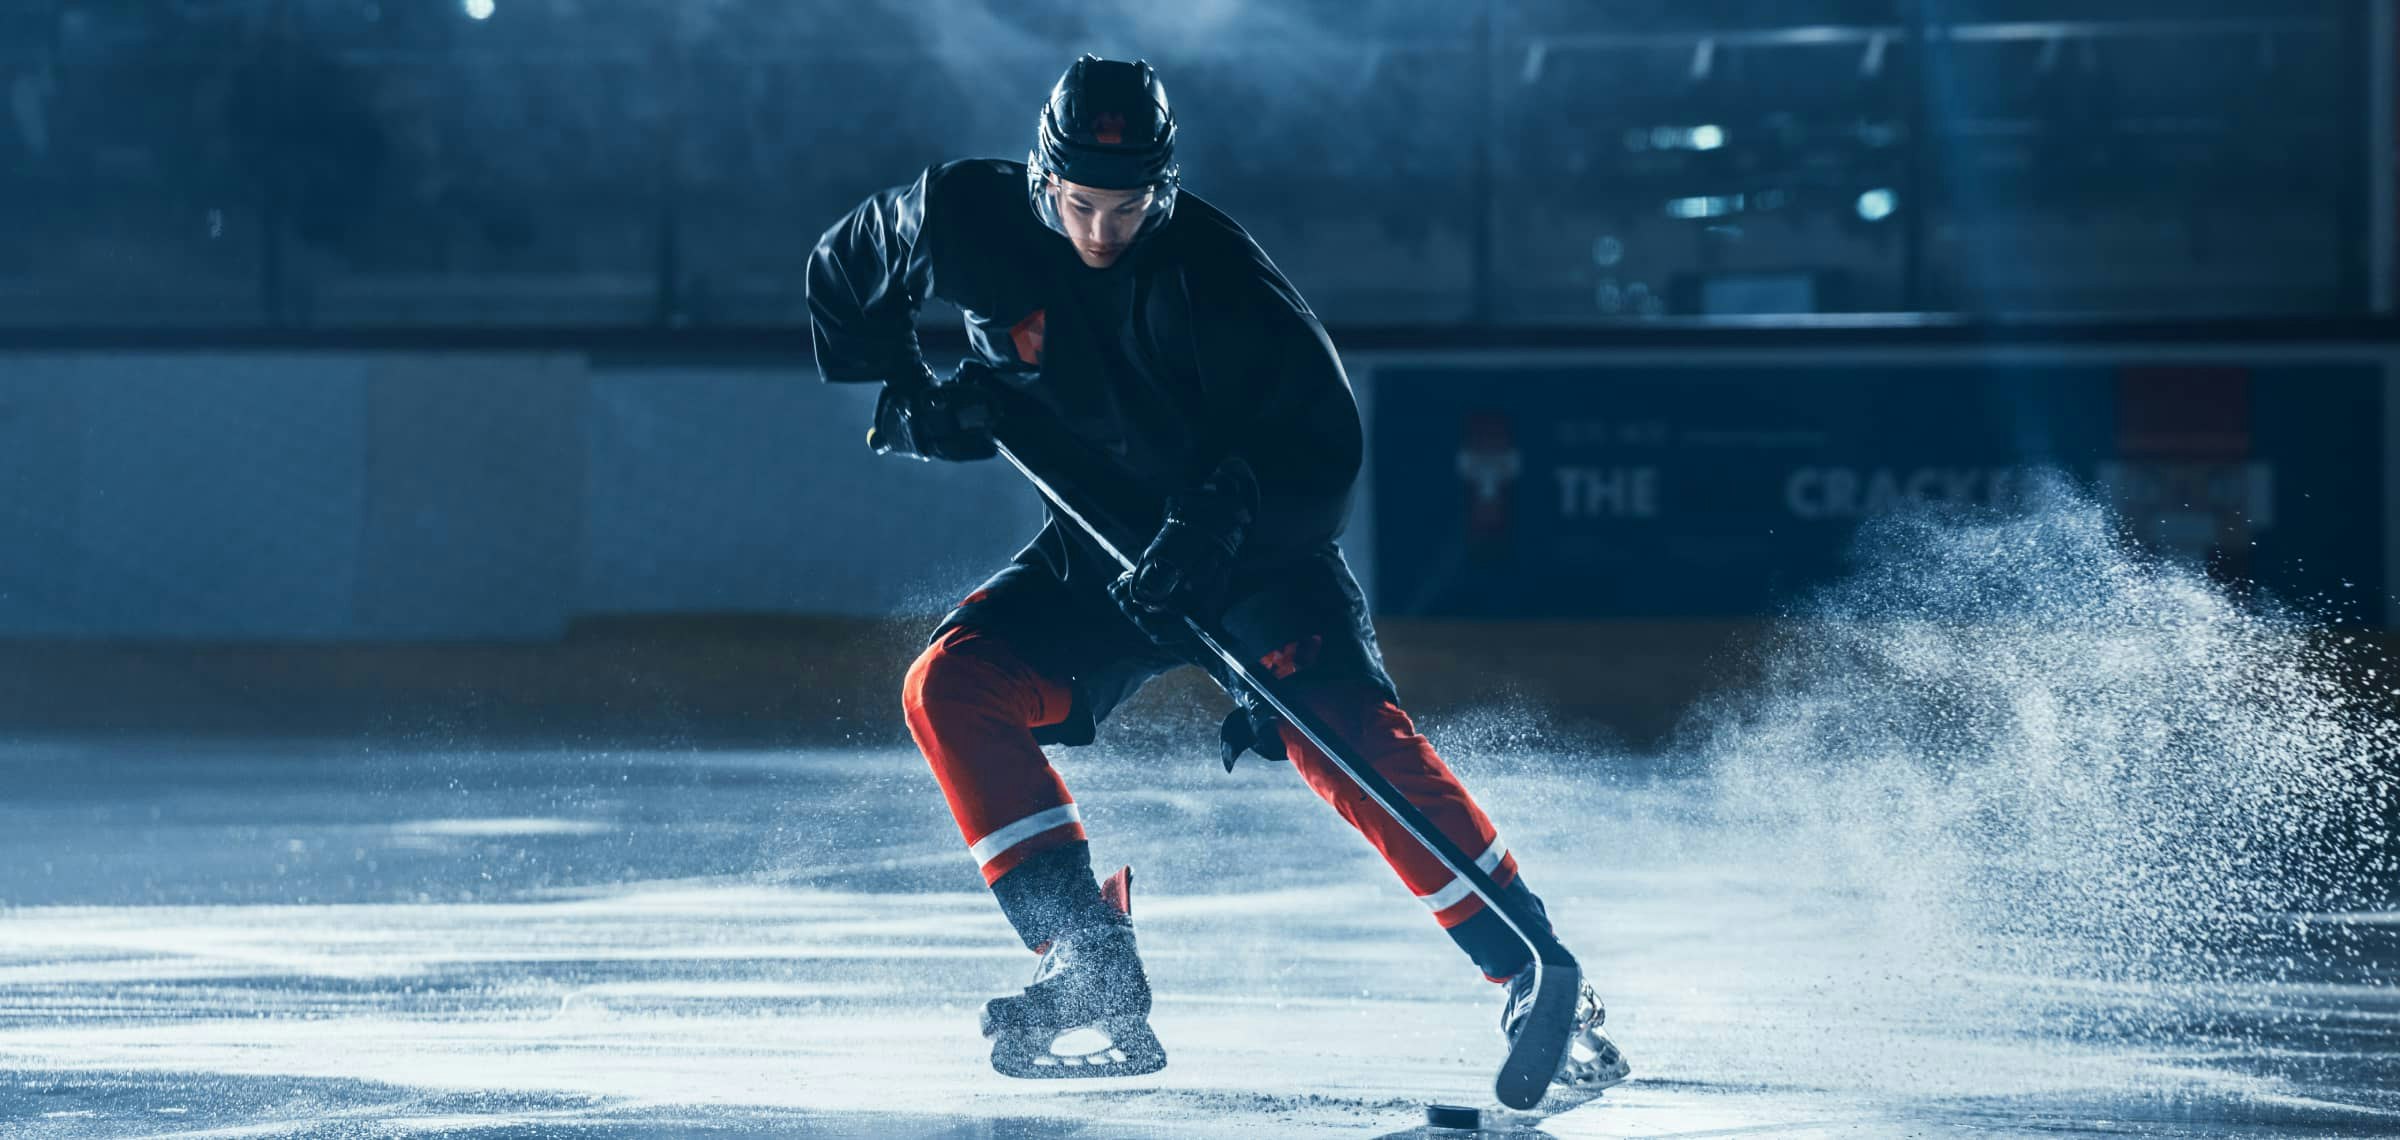 Dive into the world of 3ICE and all things hockey at Bitcasino!